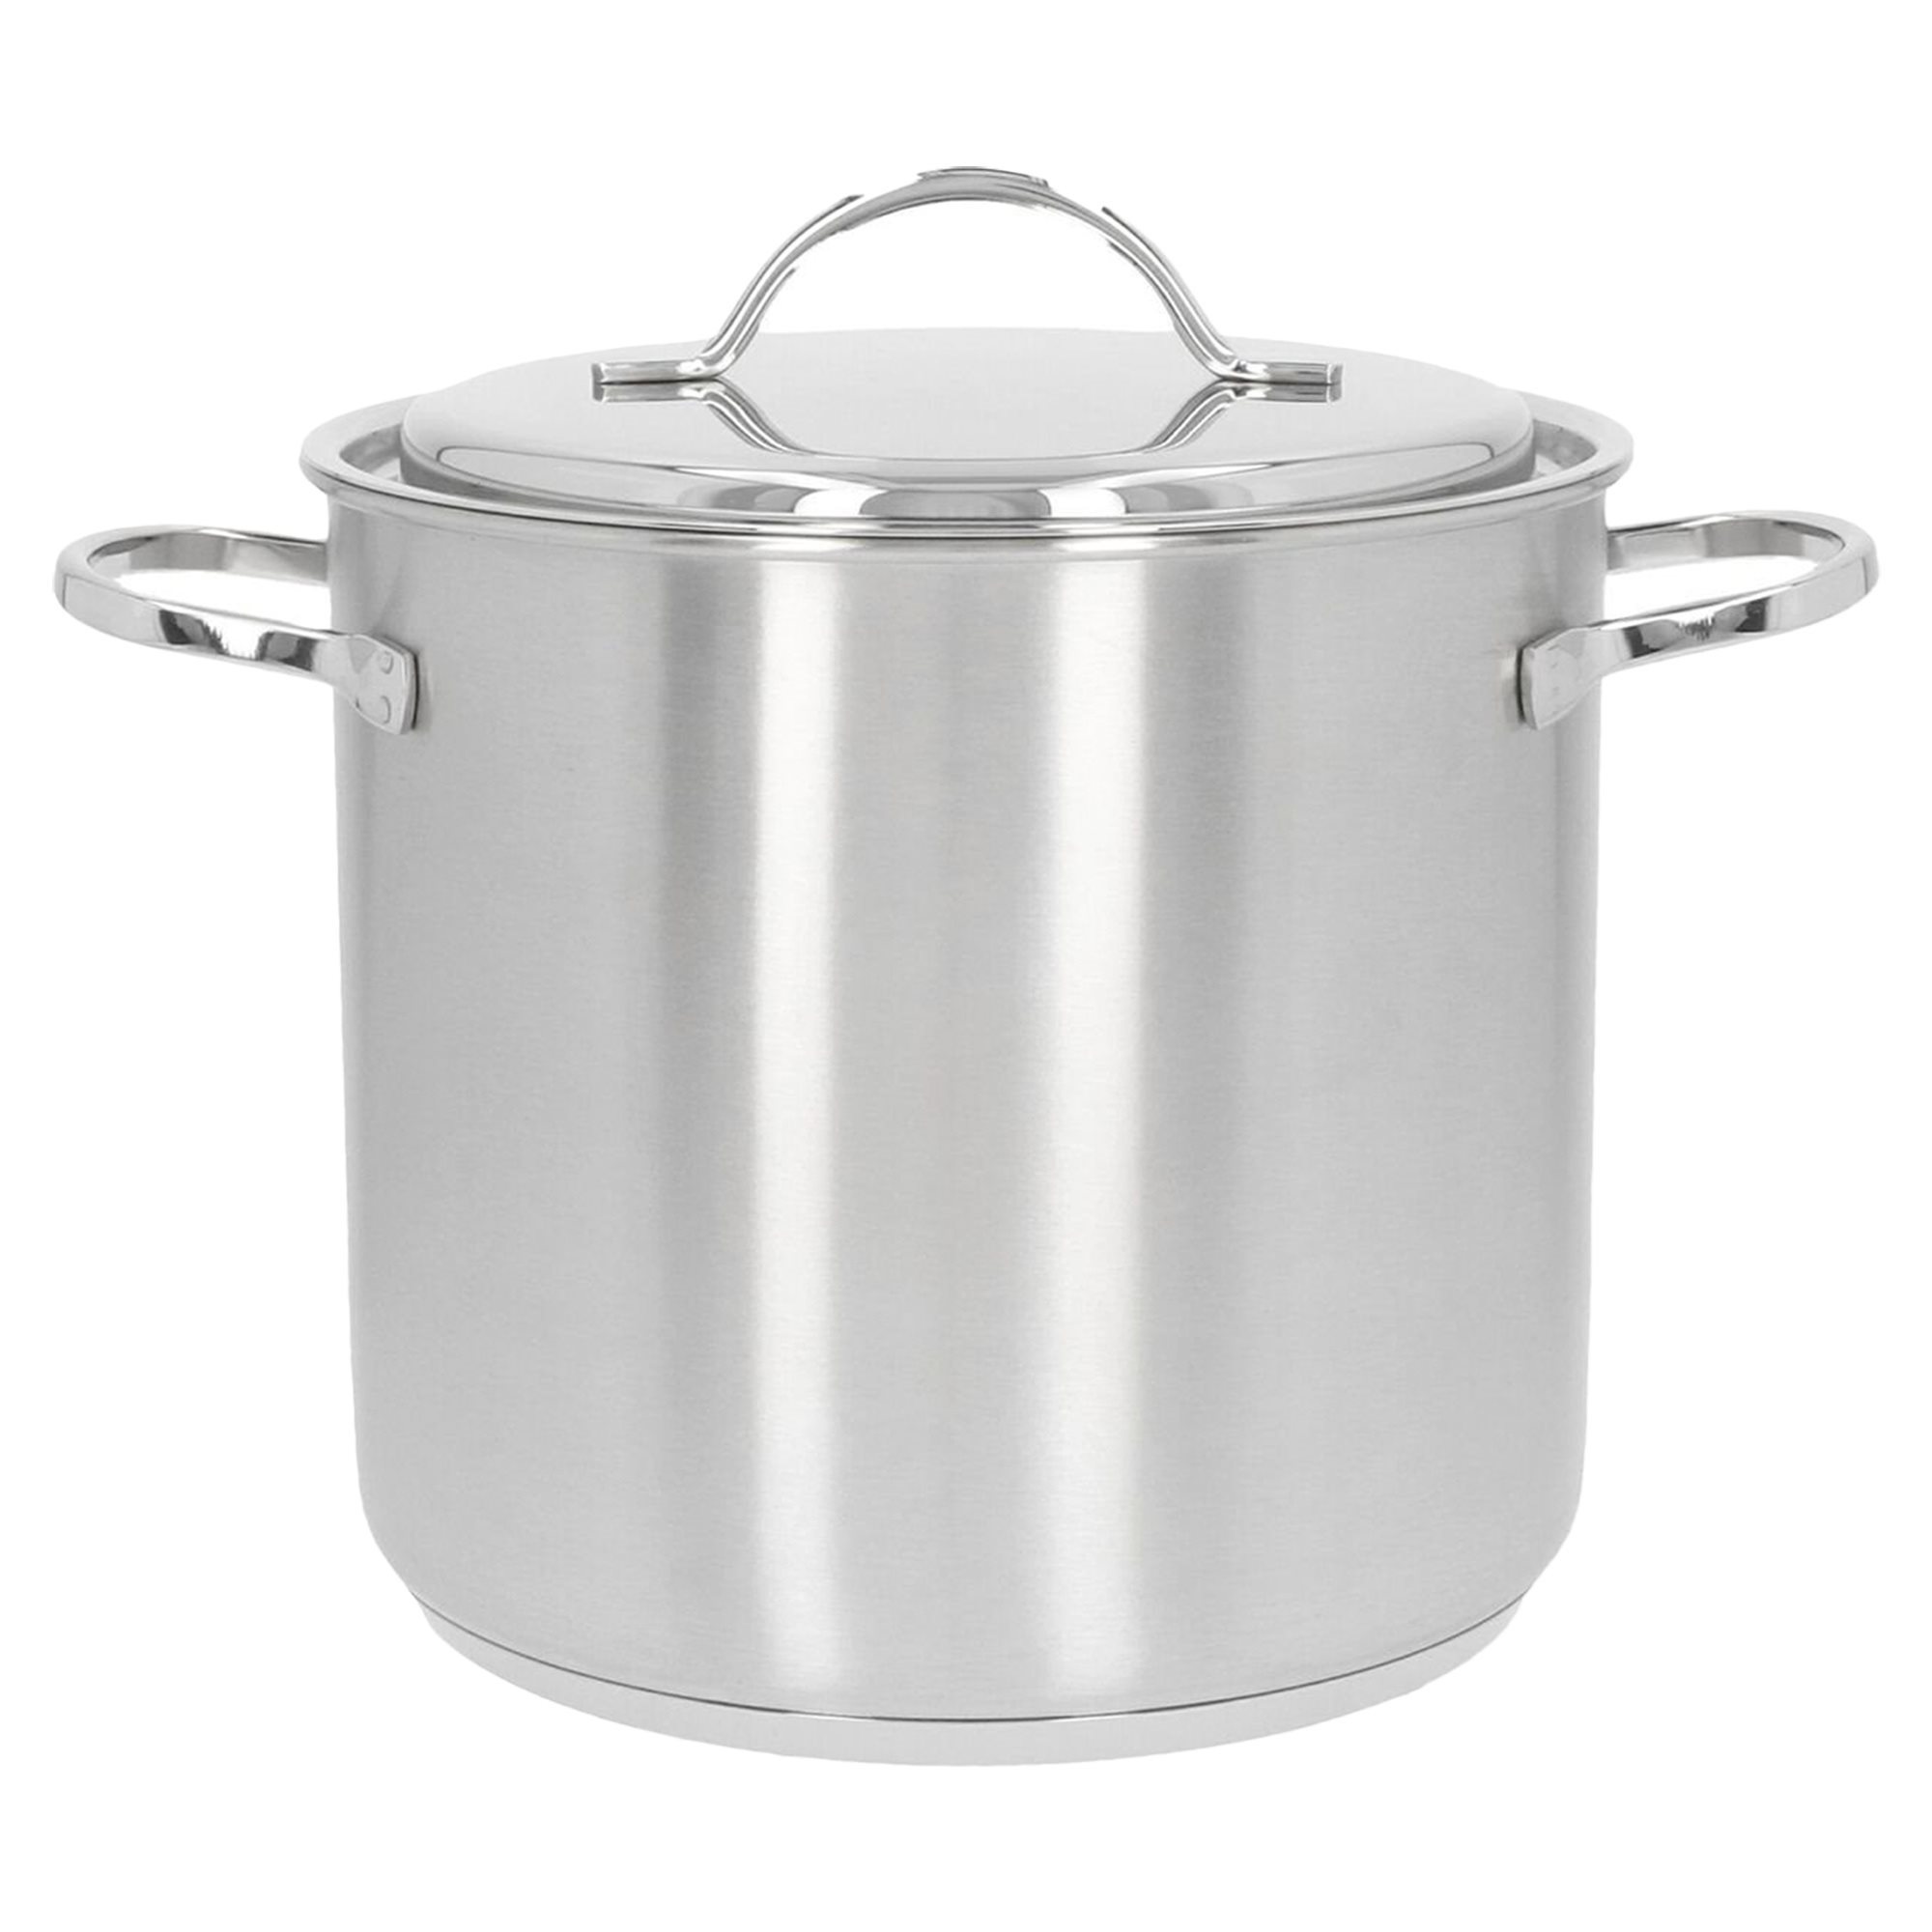 2-Quart Stainless Steel Sauce Pan Small Soup Pot with Lid - China